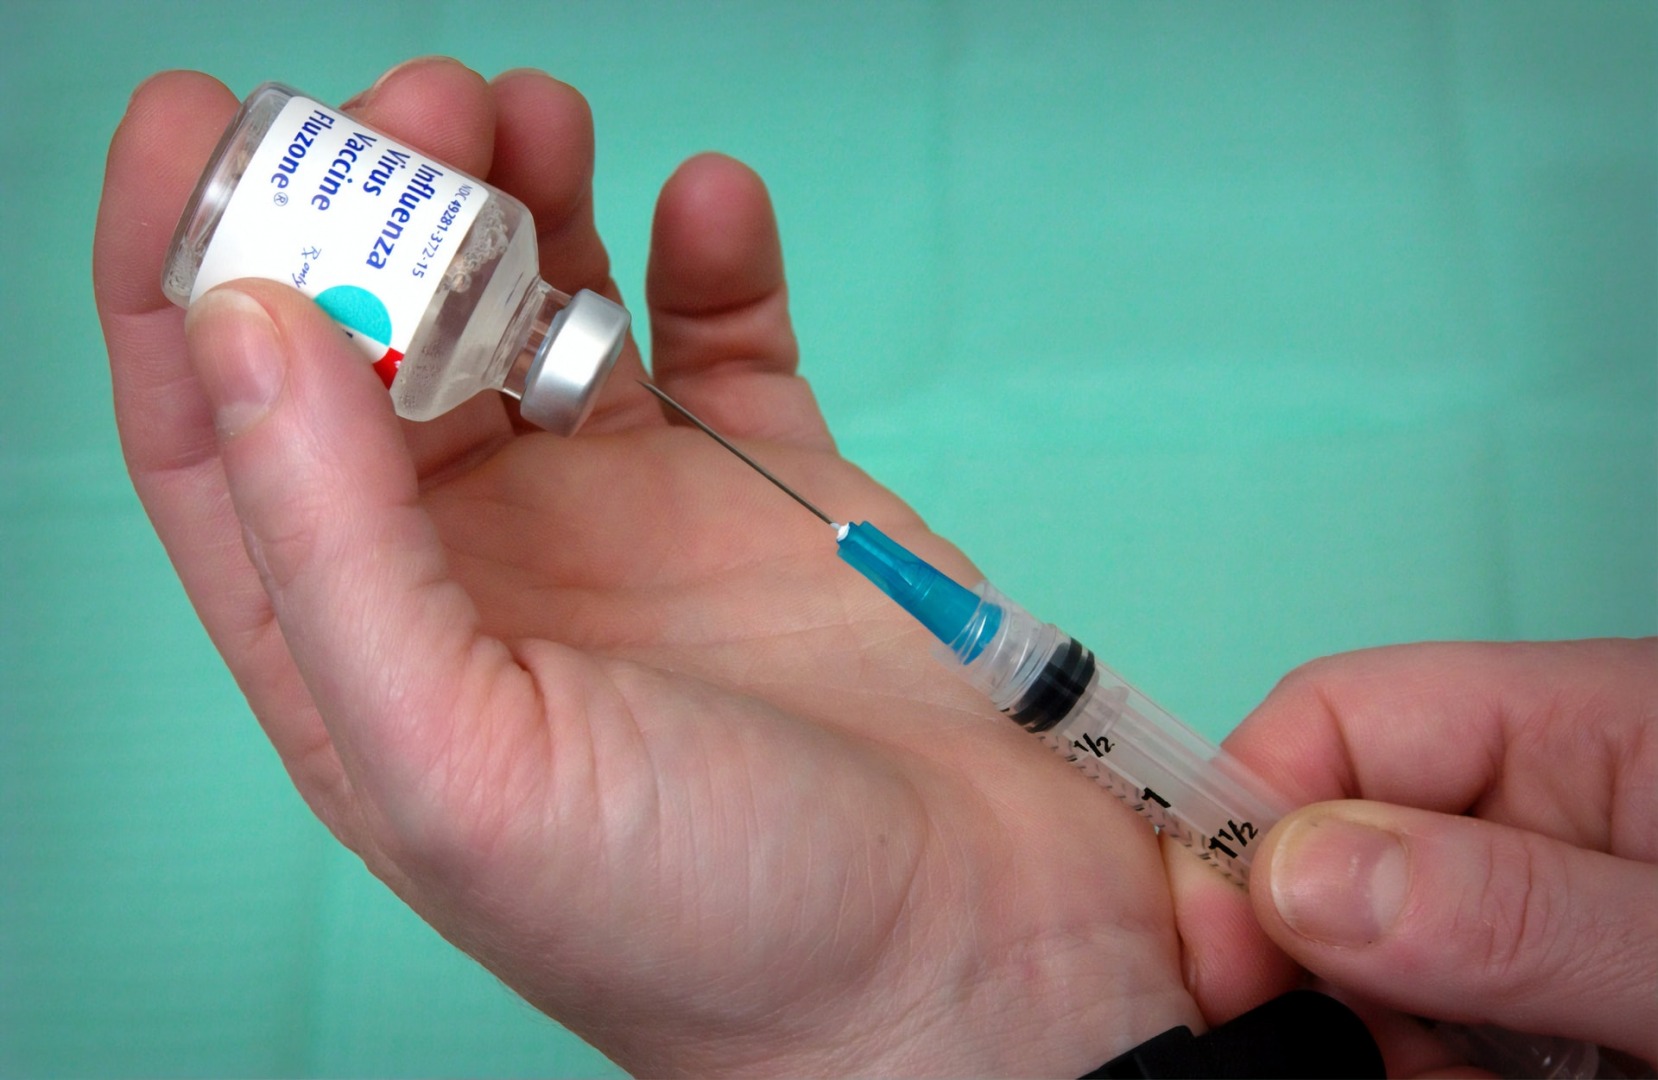 Why Do Scientists Need to Make a New Flu Vaccine Each Year